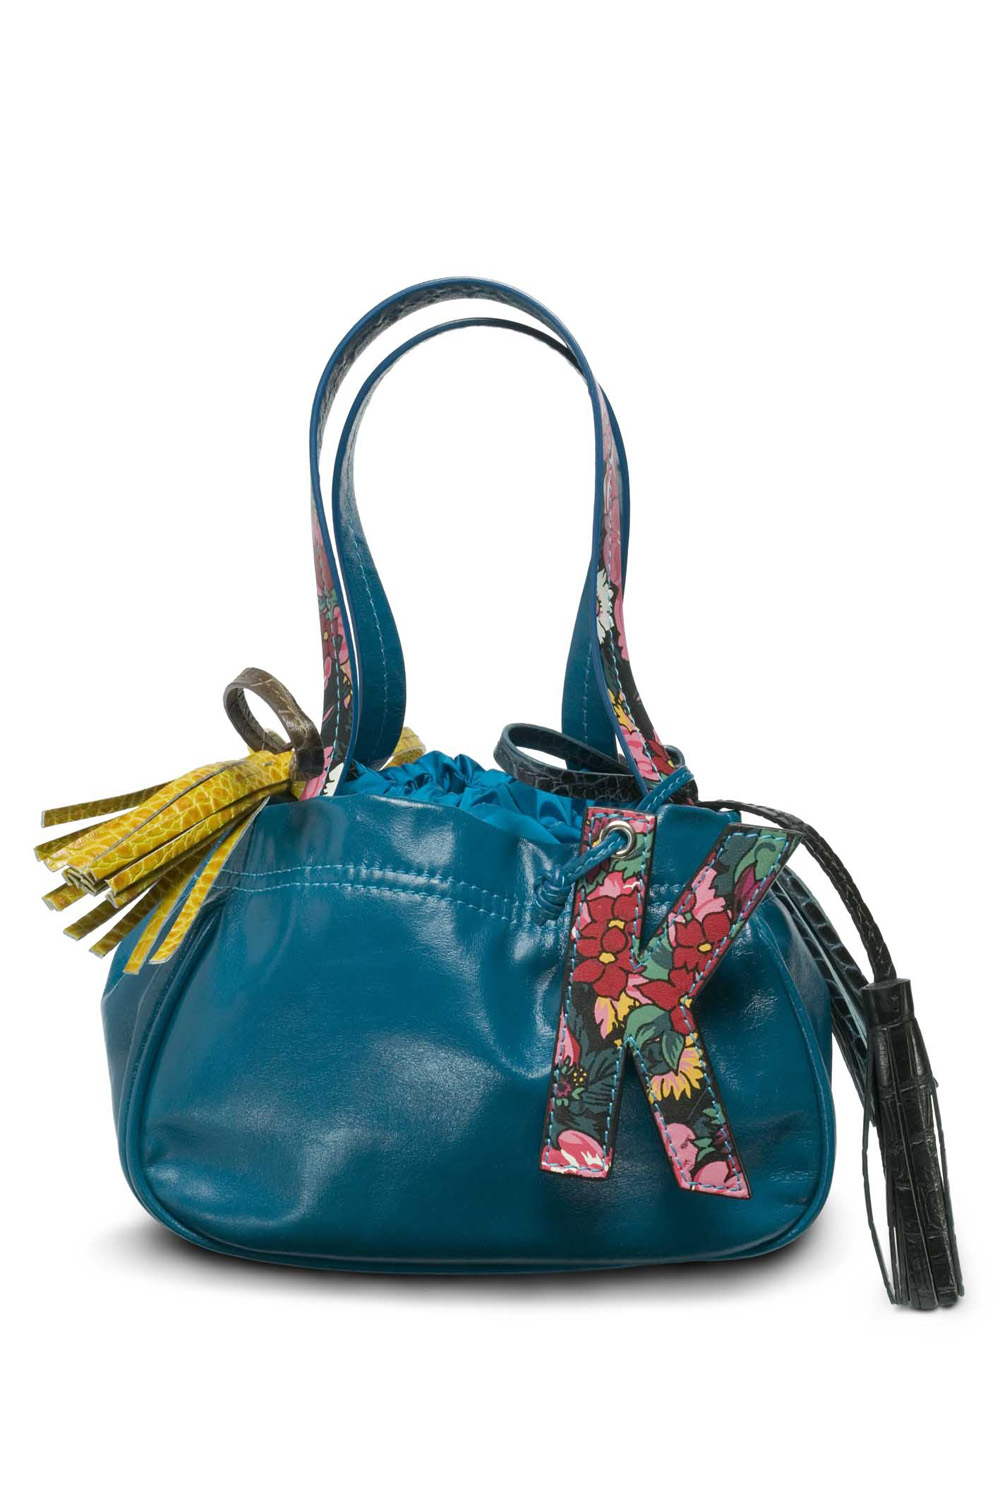 Kenzo Bags Fall 2009: The Perfect Finishing Touch